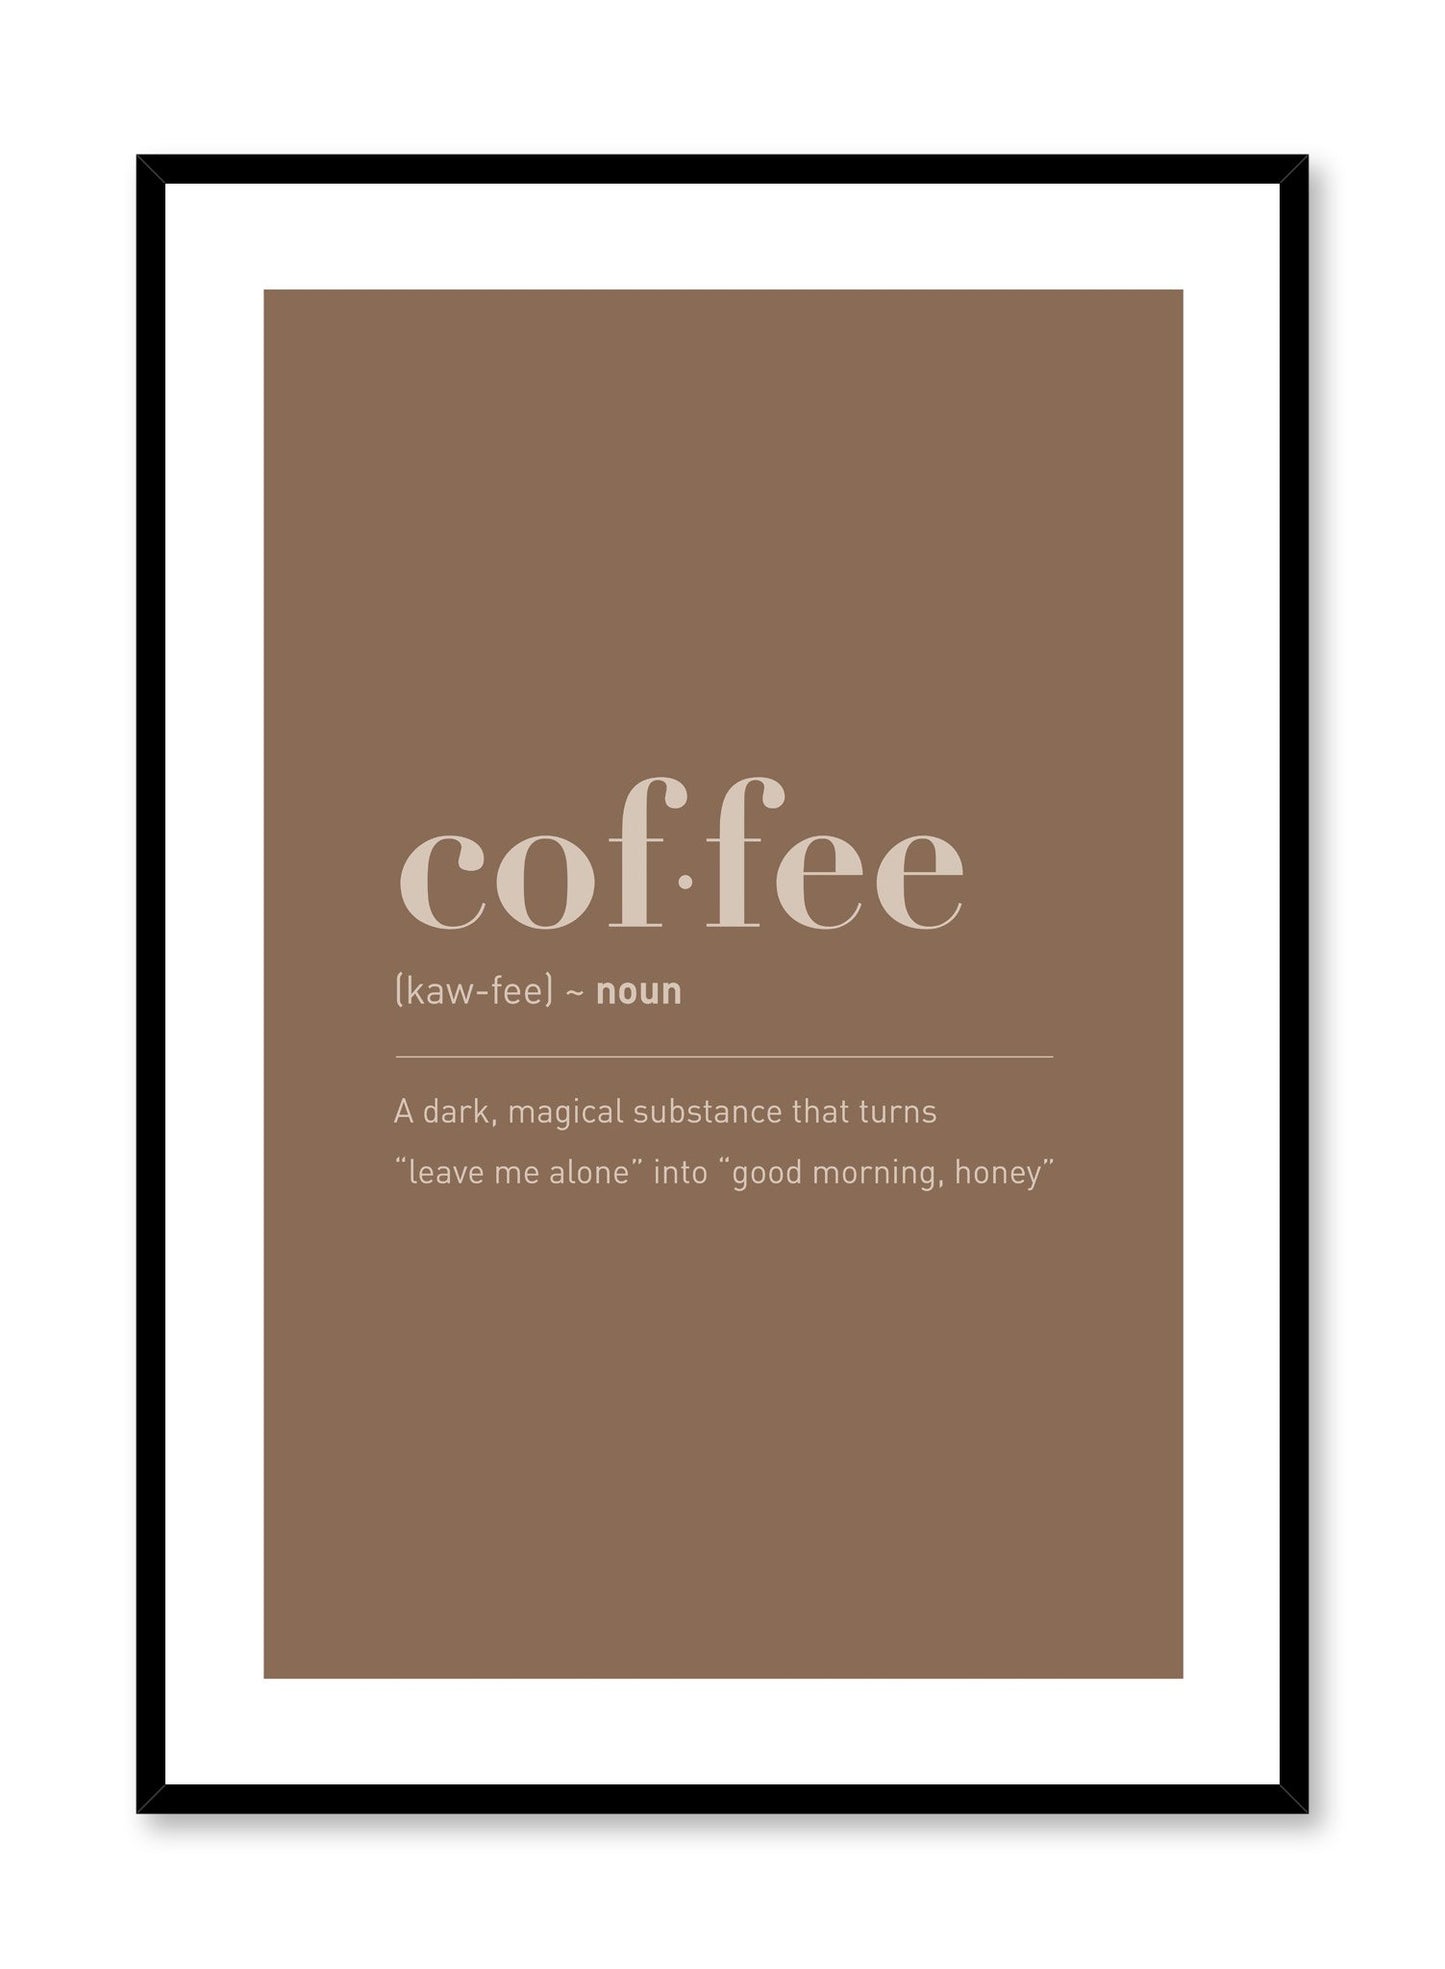 Minimalist poster by Opposite Wall with Coffee quote typography in espresso brown